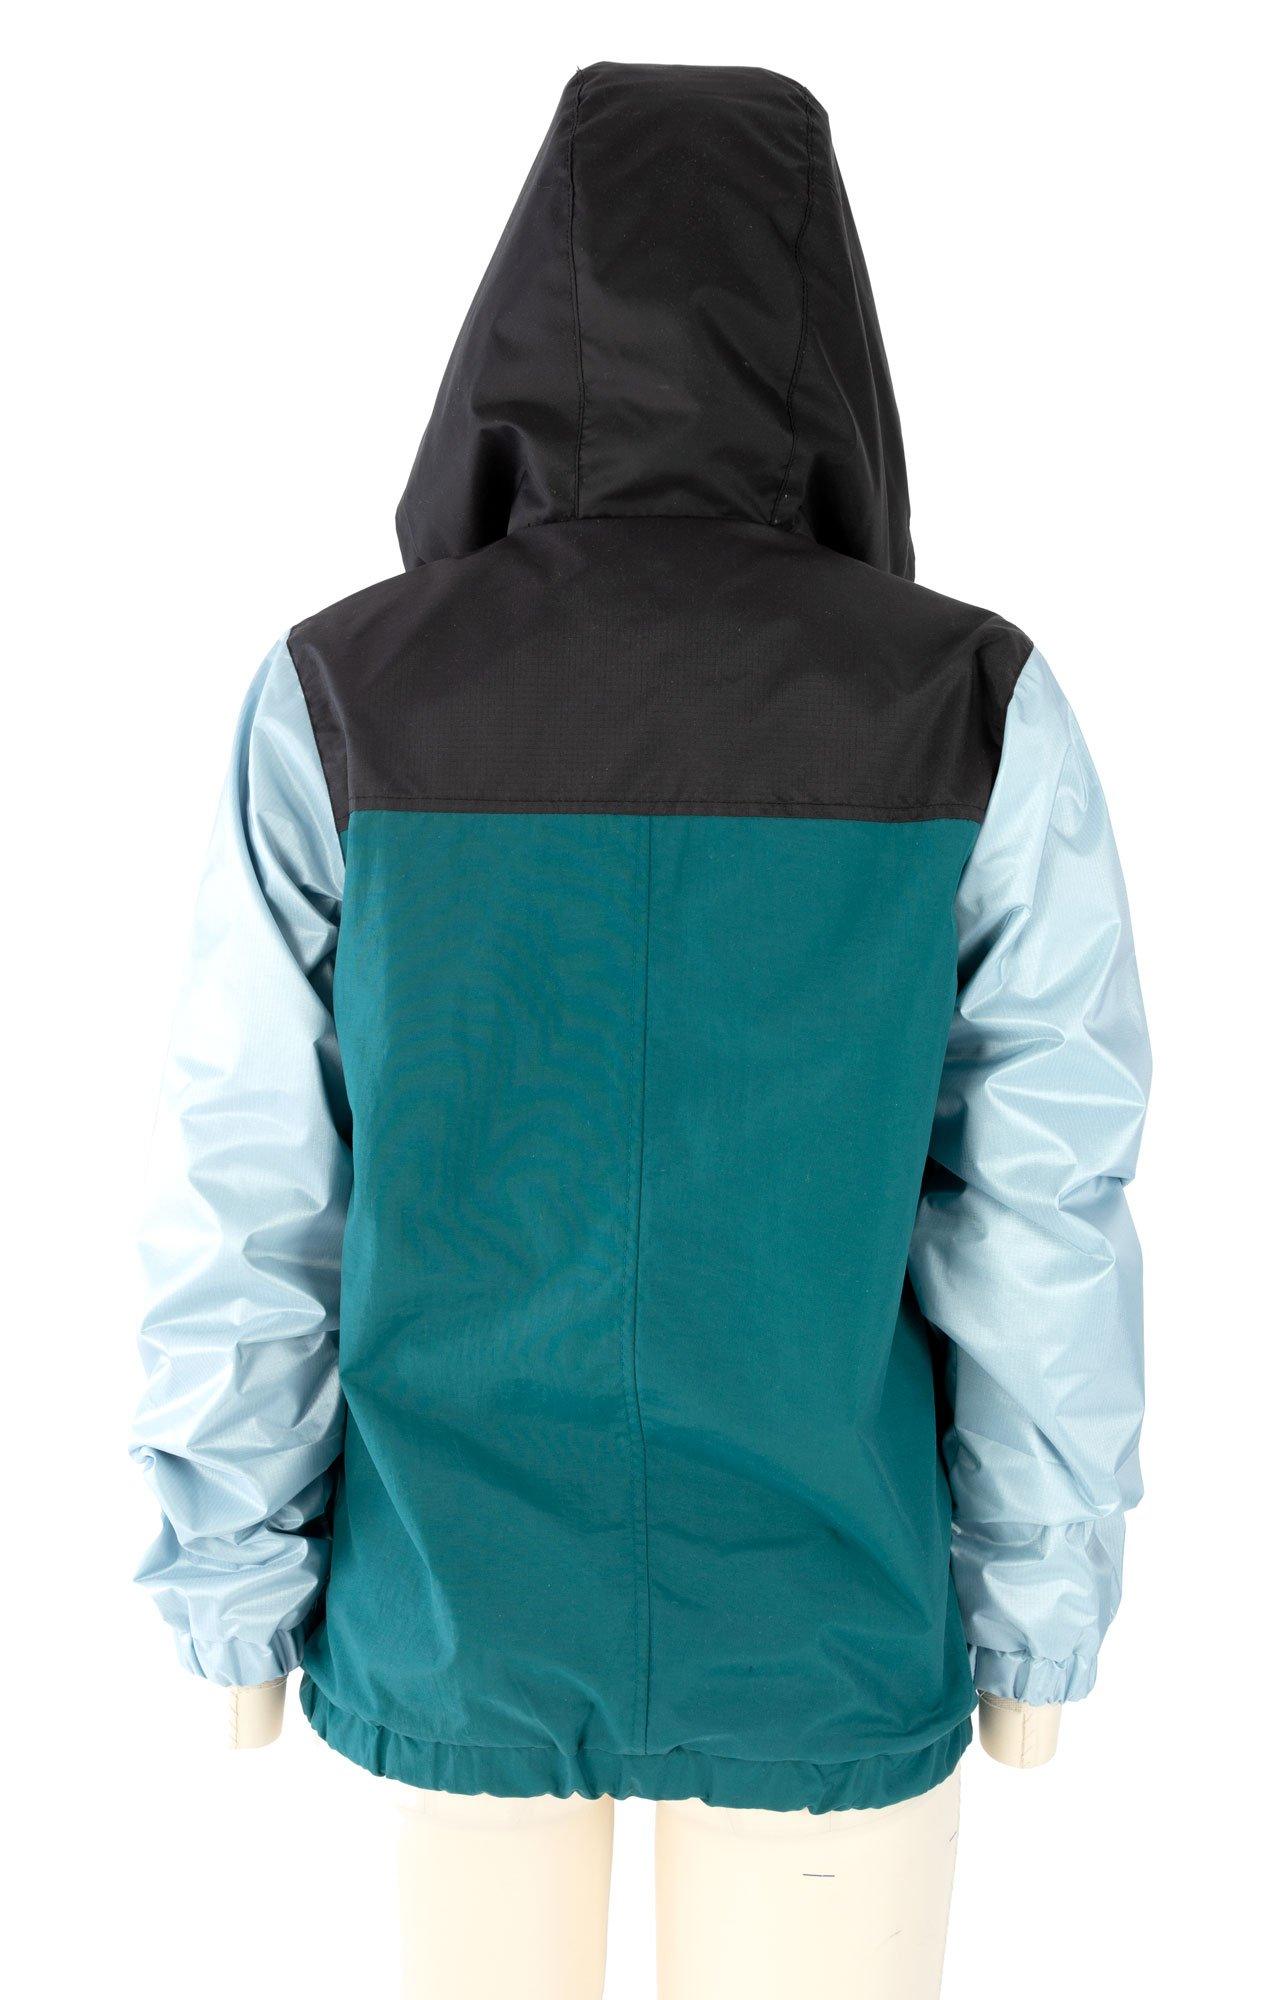 Hood add-on for the MAXIME jacket